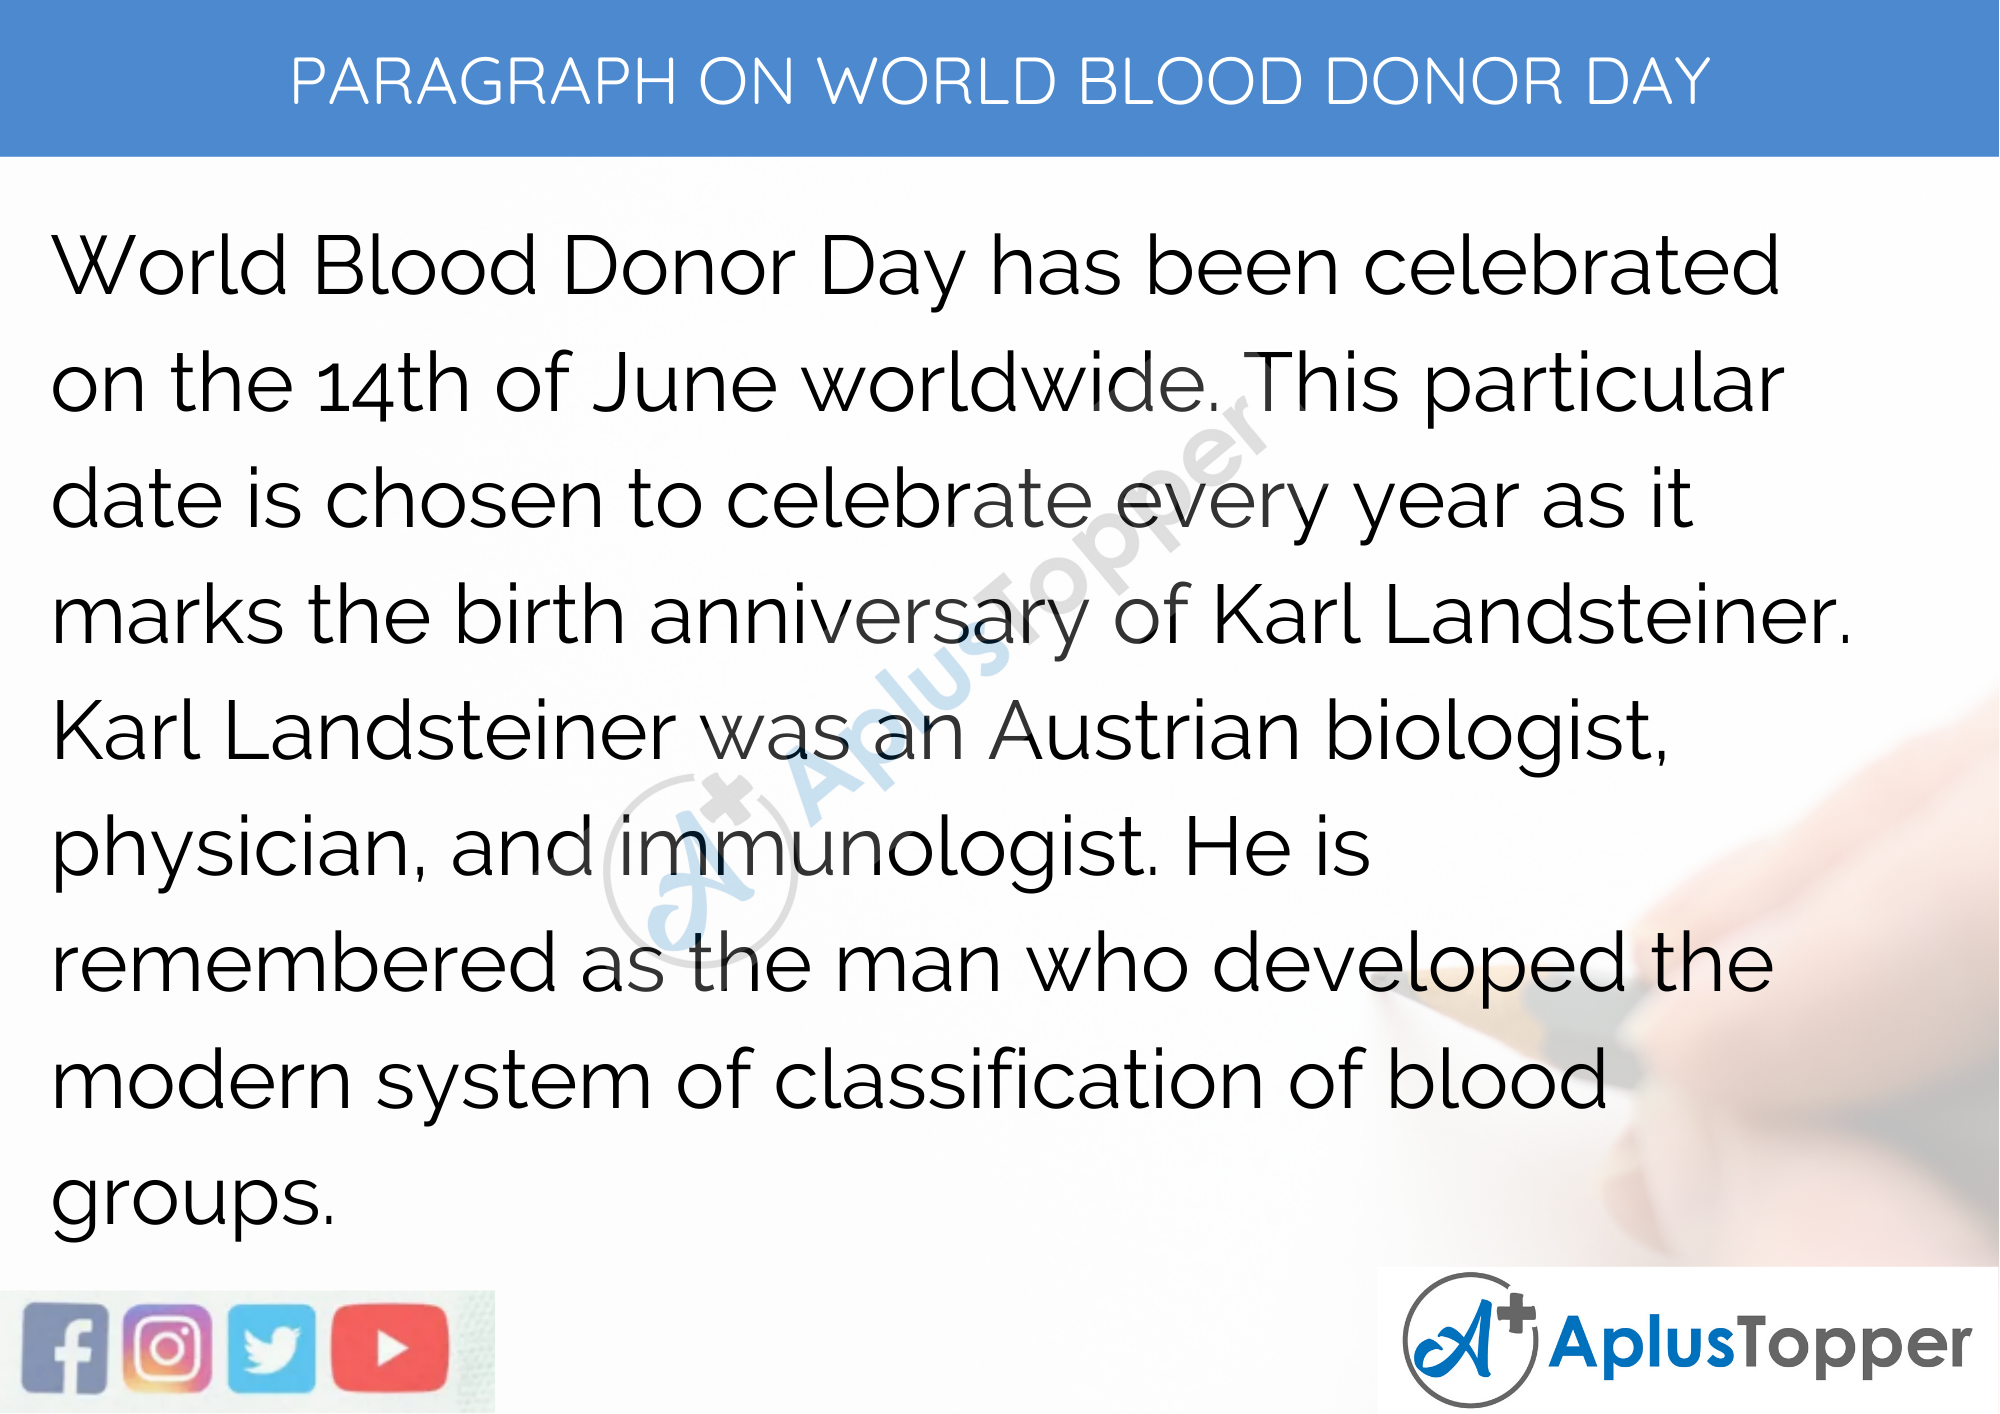 Paragraph on World Blood Donor Day - 250 to 300 Words for Classes 9, 10, 11, and 12, And Competitive Exam Aspirants